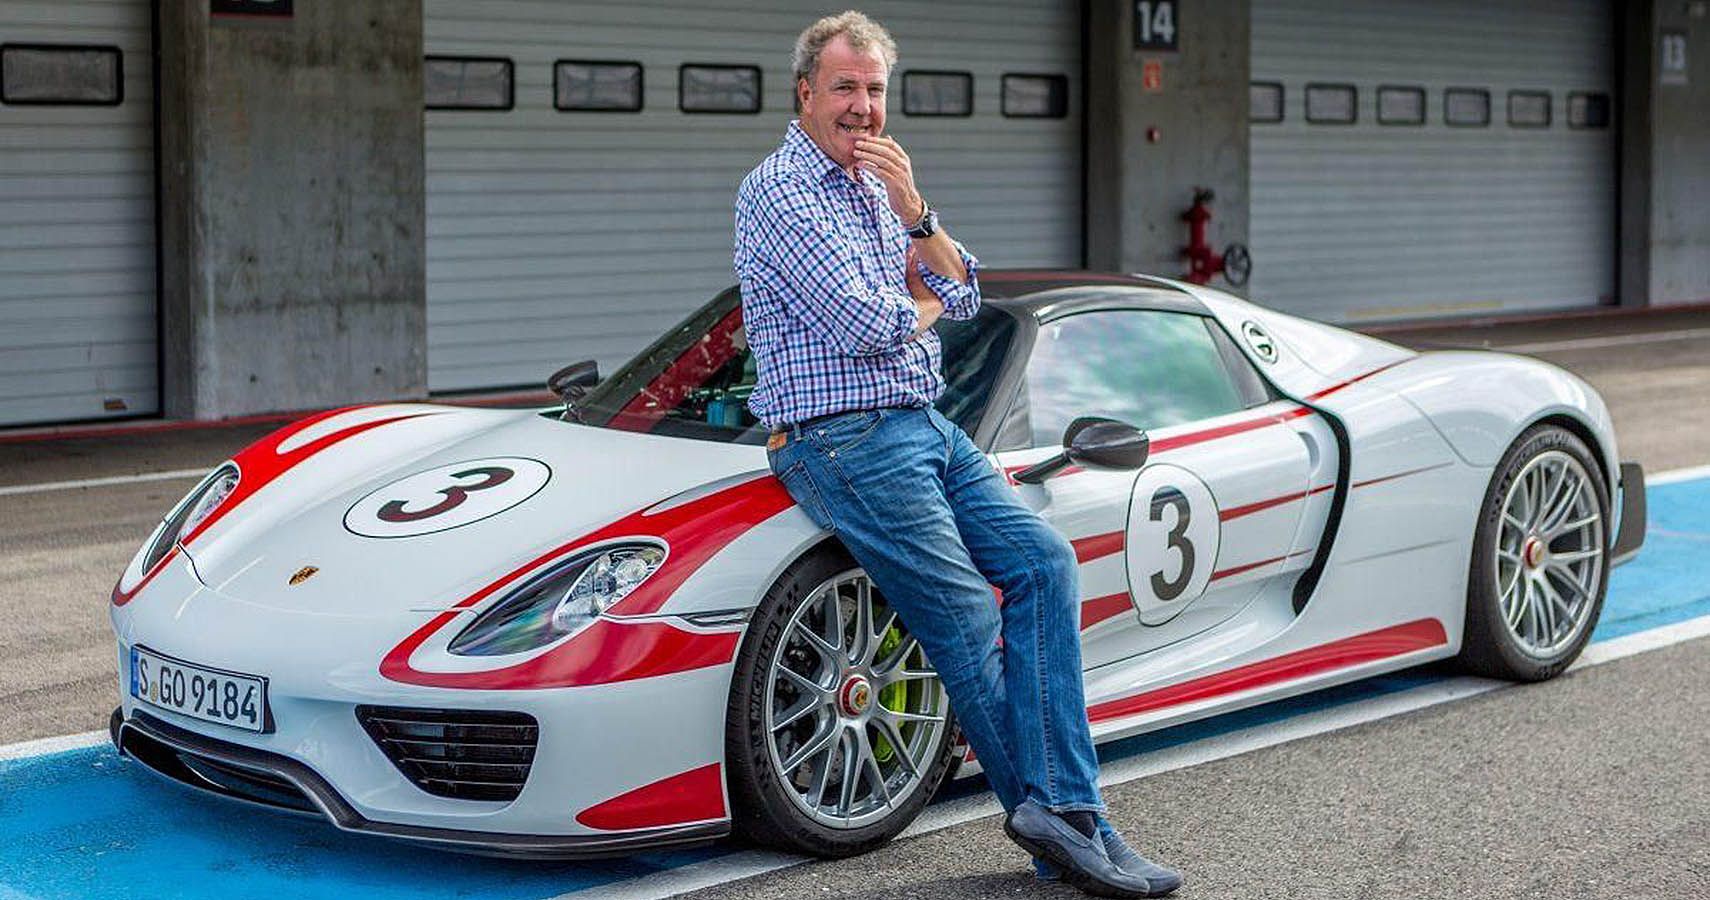 The Grand Tour: The New “Top Gear”